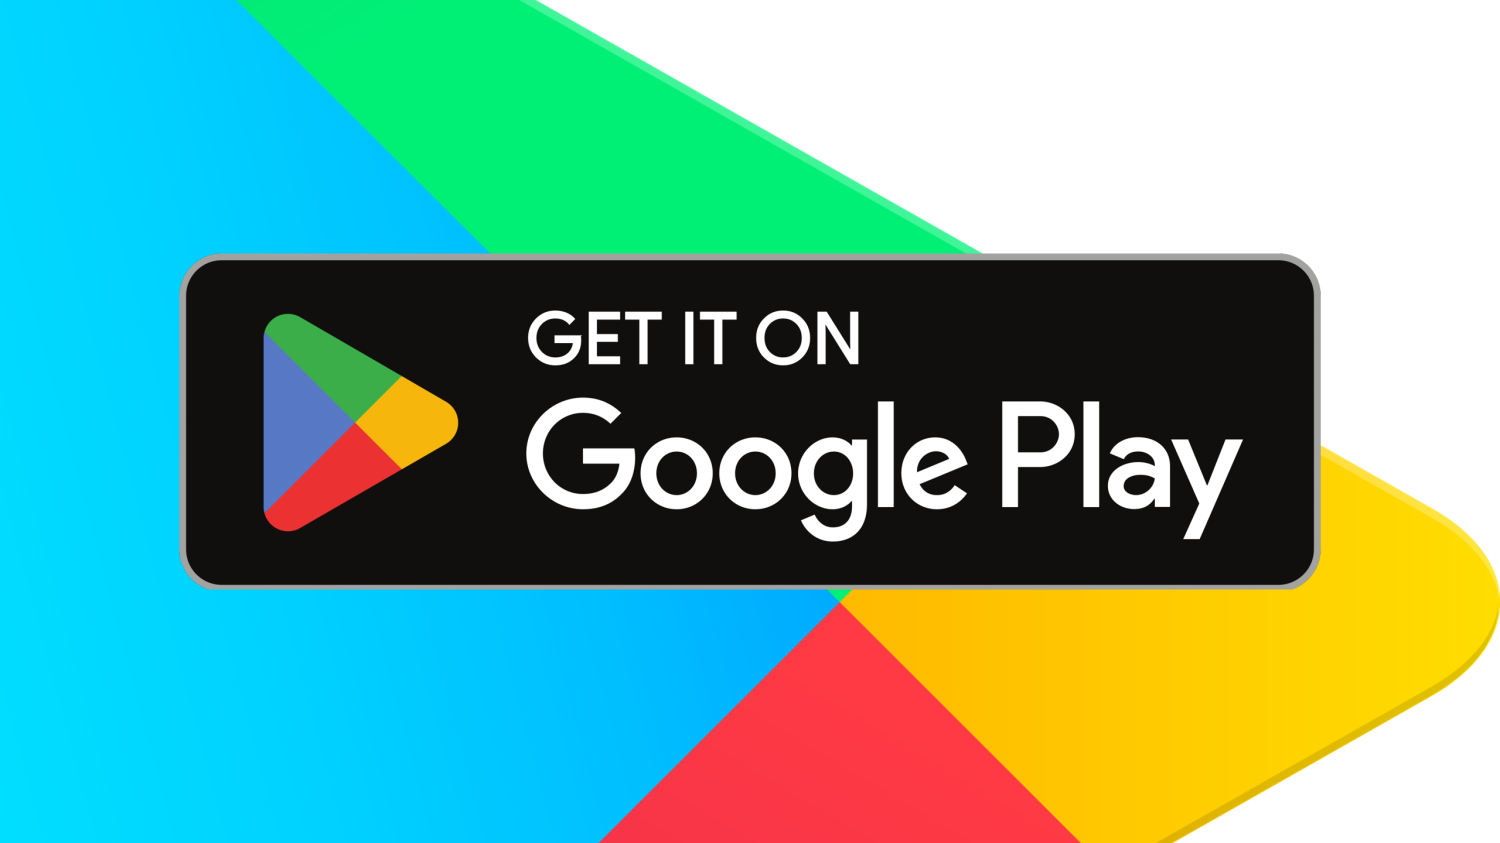 Google Play screenshot sizes and guidelines for Android apps